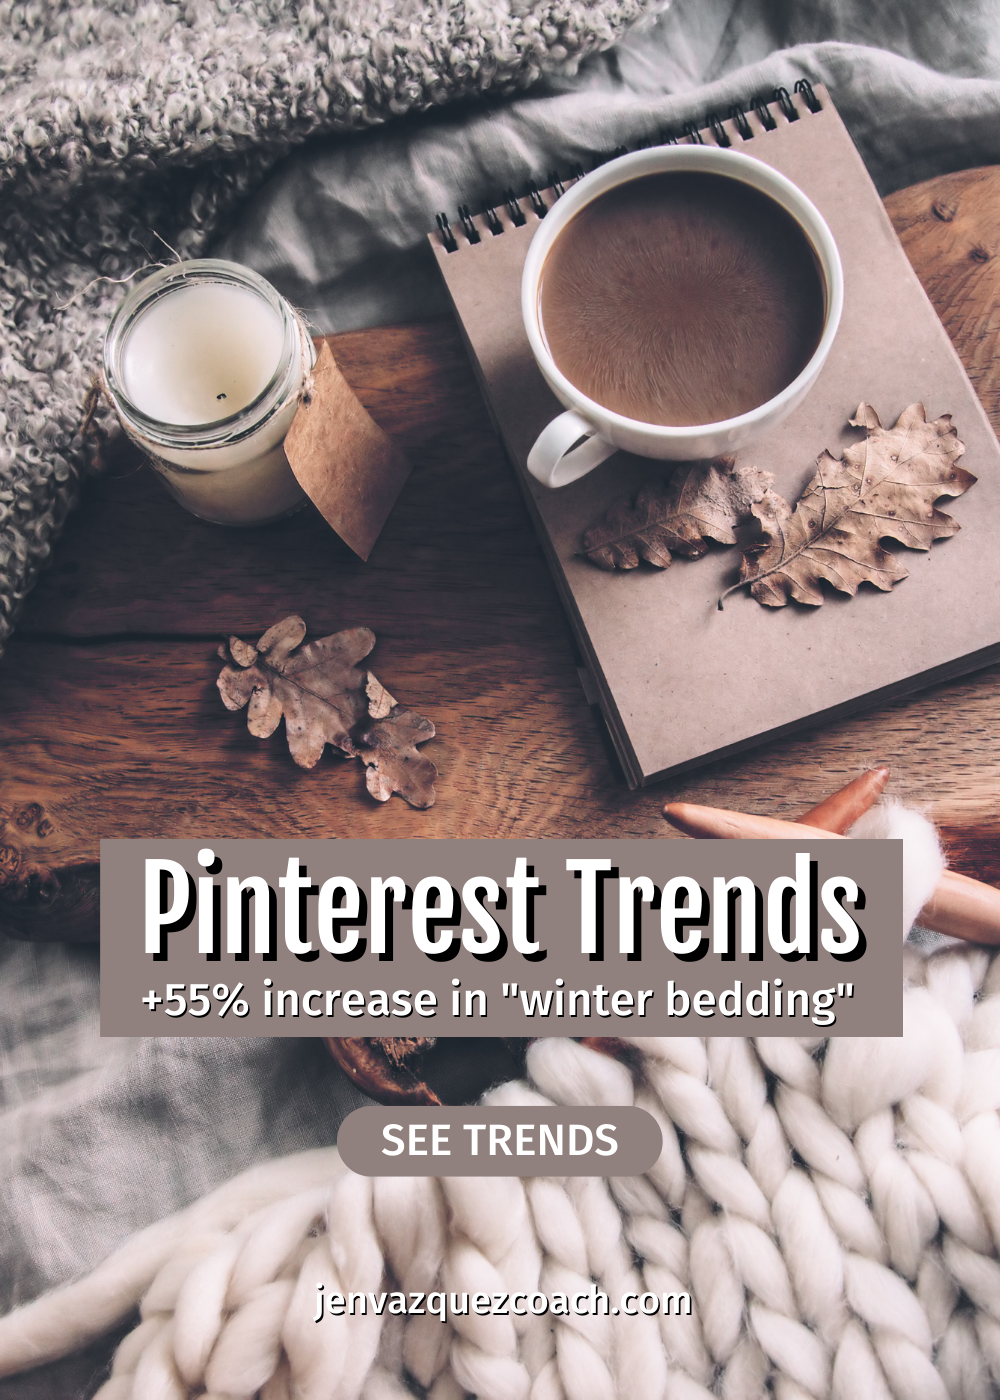 What's Trending Now on Pinterest | Pinterest Predicts Weekly 11-18-22 by Jen Vazquez Media Pinterest Marketing